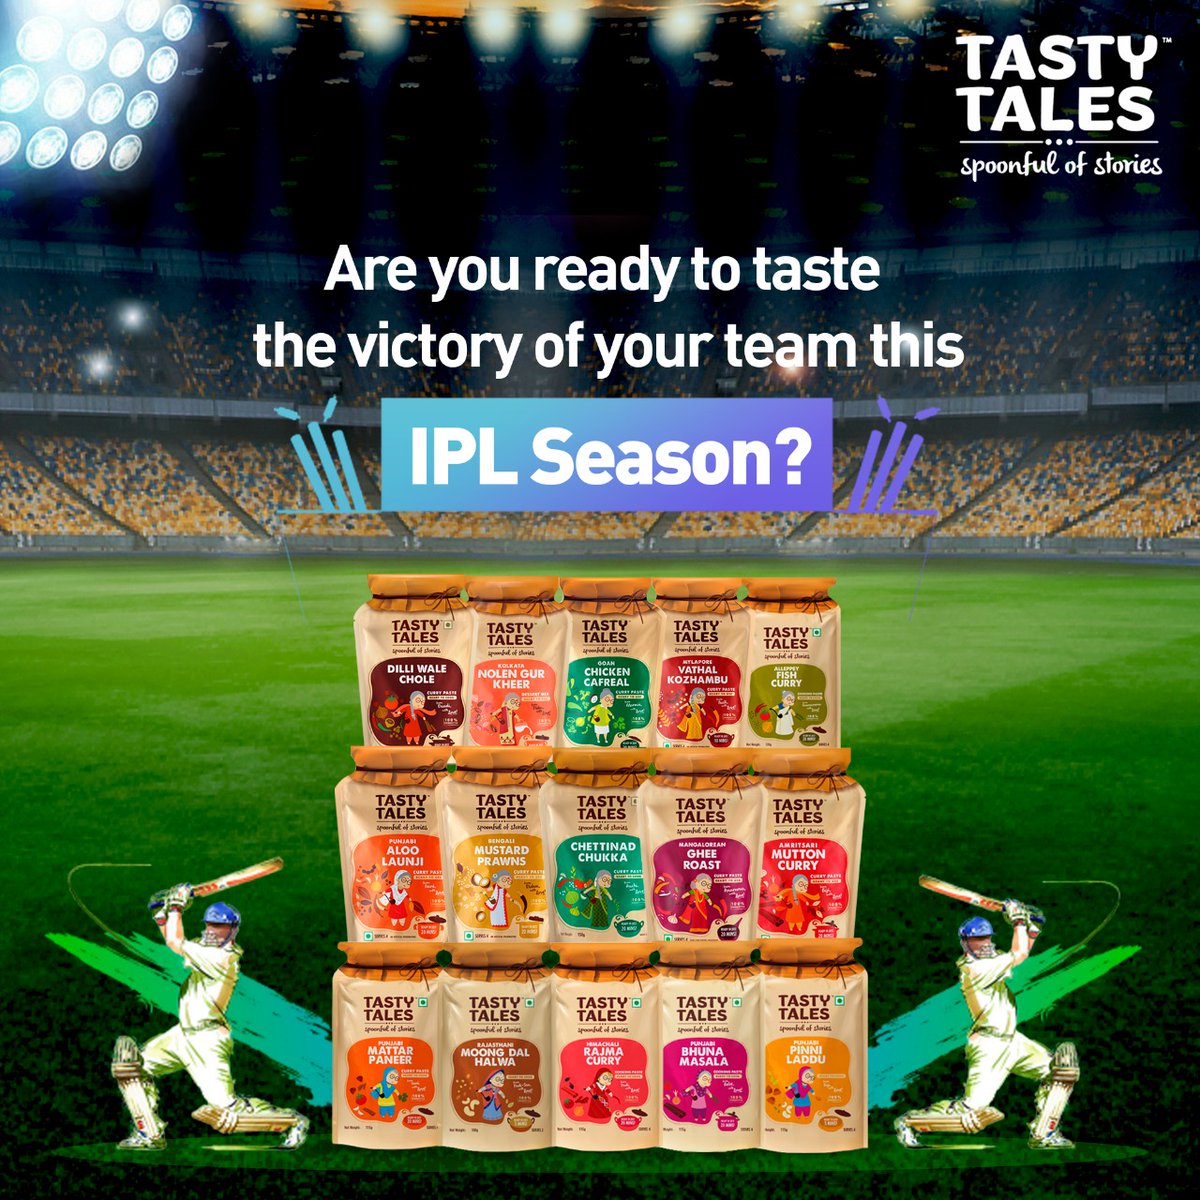 The #IPL Season is back and #TastyTales brings you the range of our most delicious authentic homestyle curry pastes and dessert mixes. We bring the IPL #TastyTalesCricketLeague where our lucky winners get to celebrate the #win for your favourite team with Tasty Tales hampers.